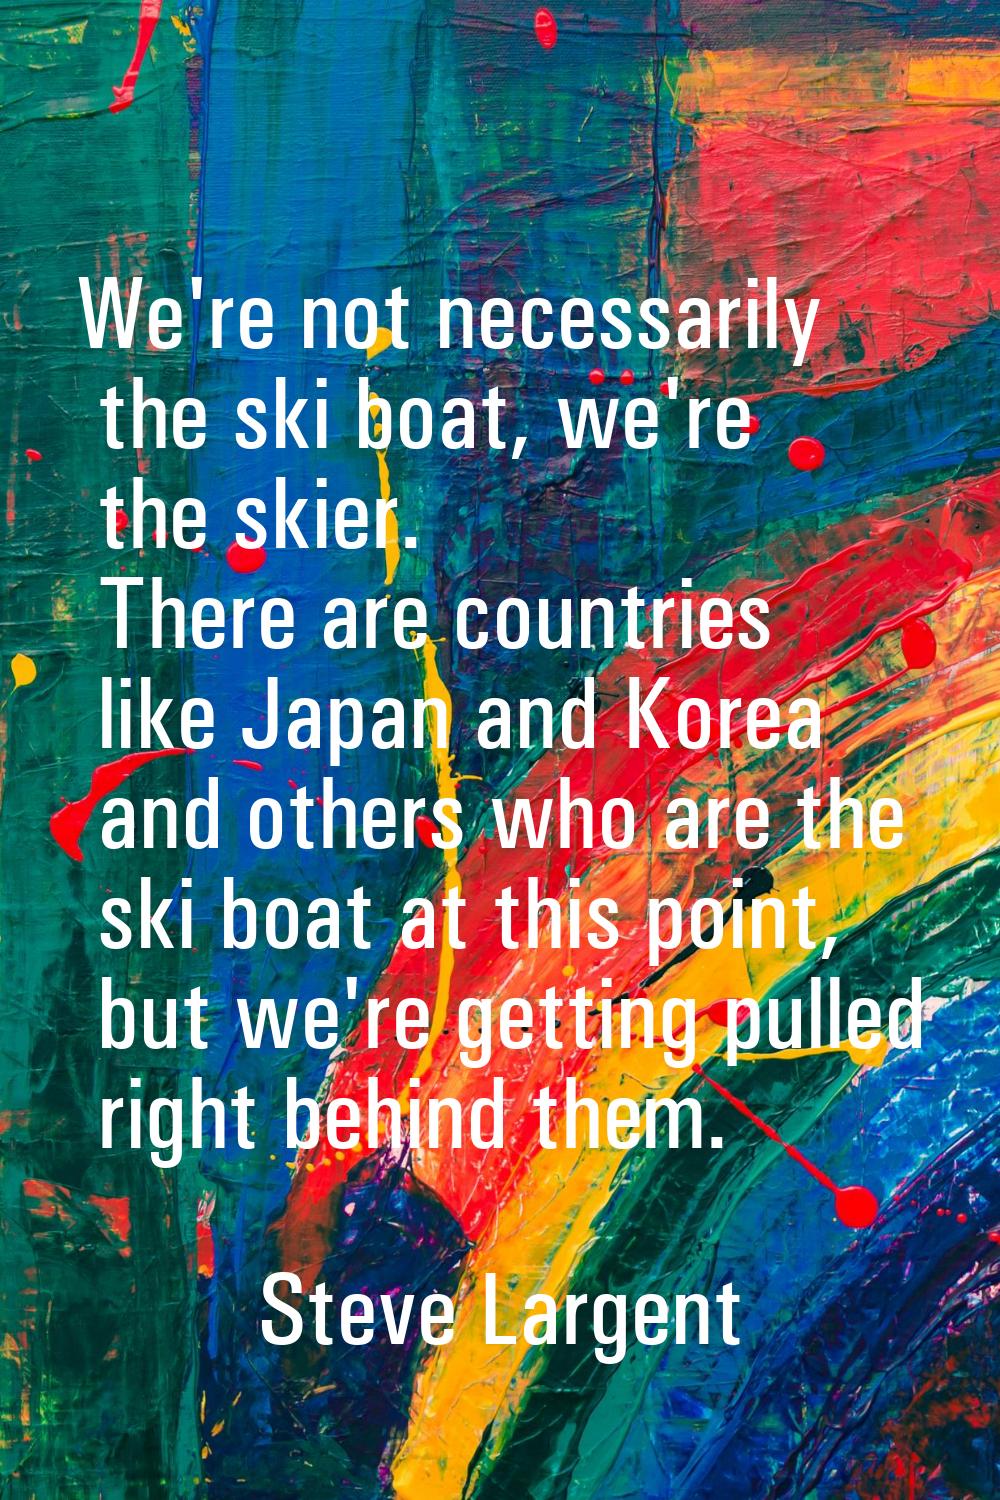 We're not necessarily the ski boat, we're the skier. There are countries like Japan and Korea and o